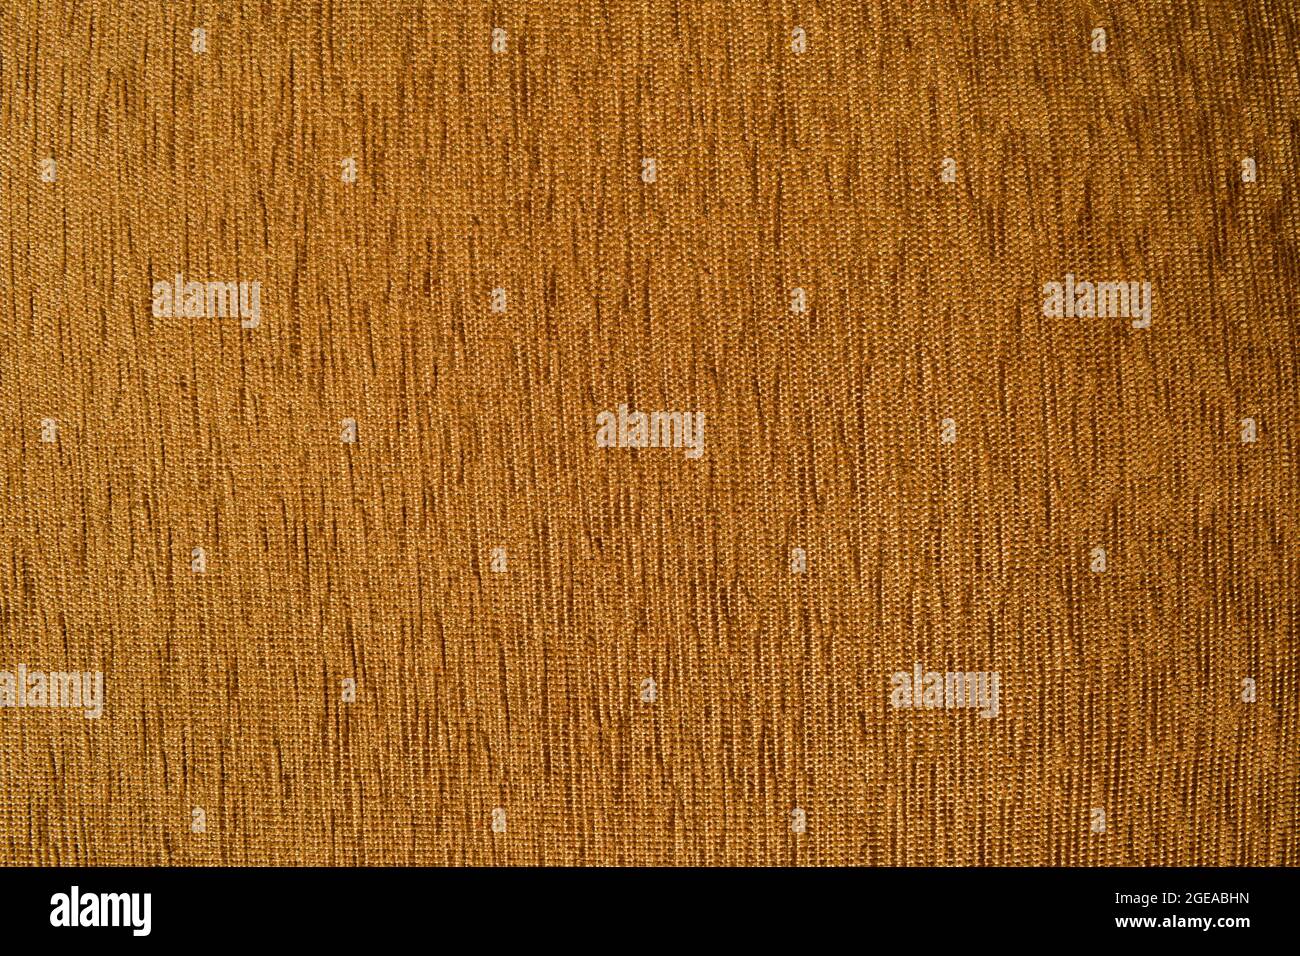 Brown Fabric cloth textile background. Shaded brown threads woven, Fabric can be used for Cushion covers, mats, blankets, seats patterned backdrop. Stock Photo